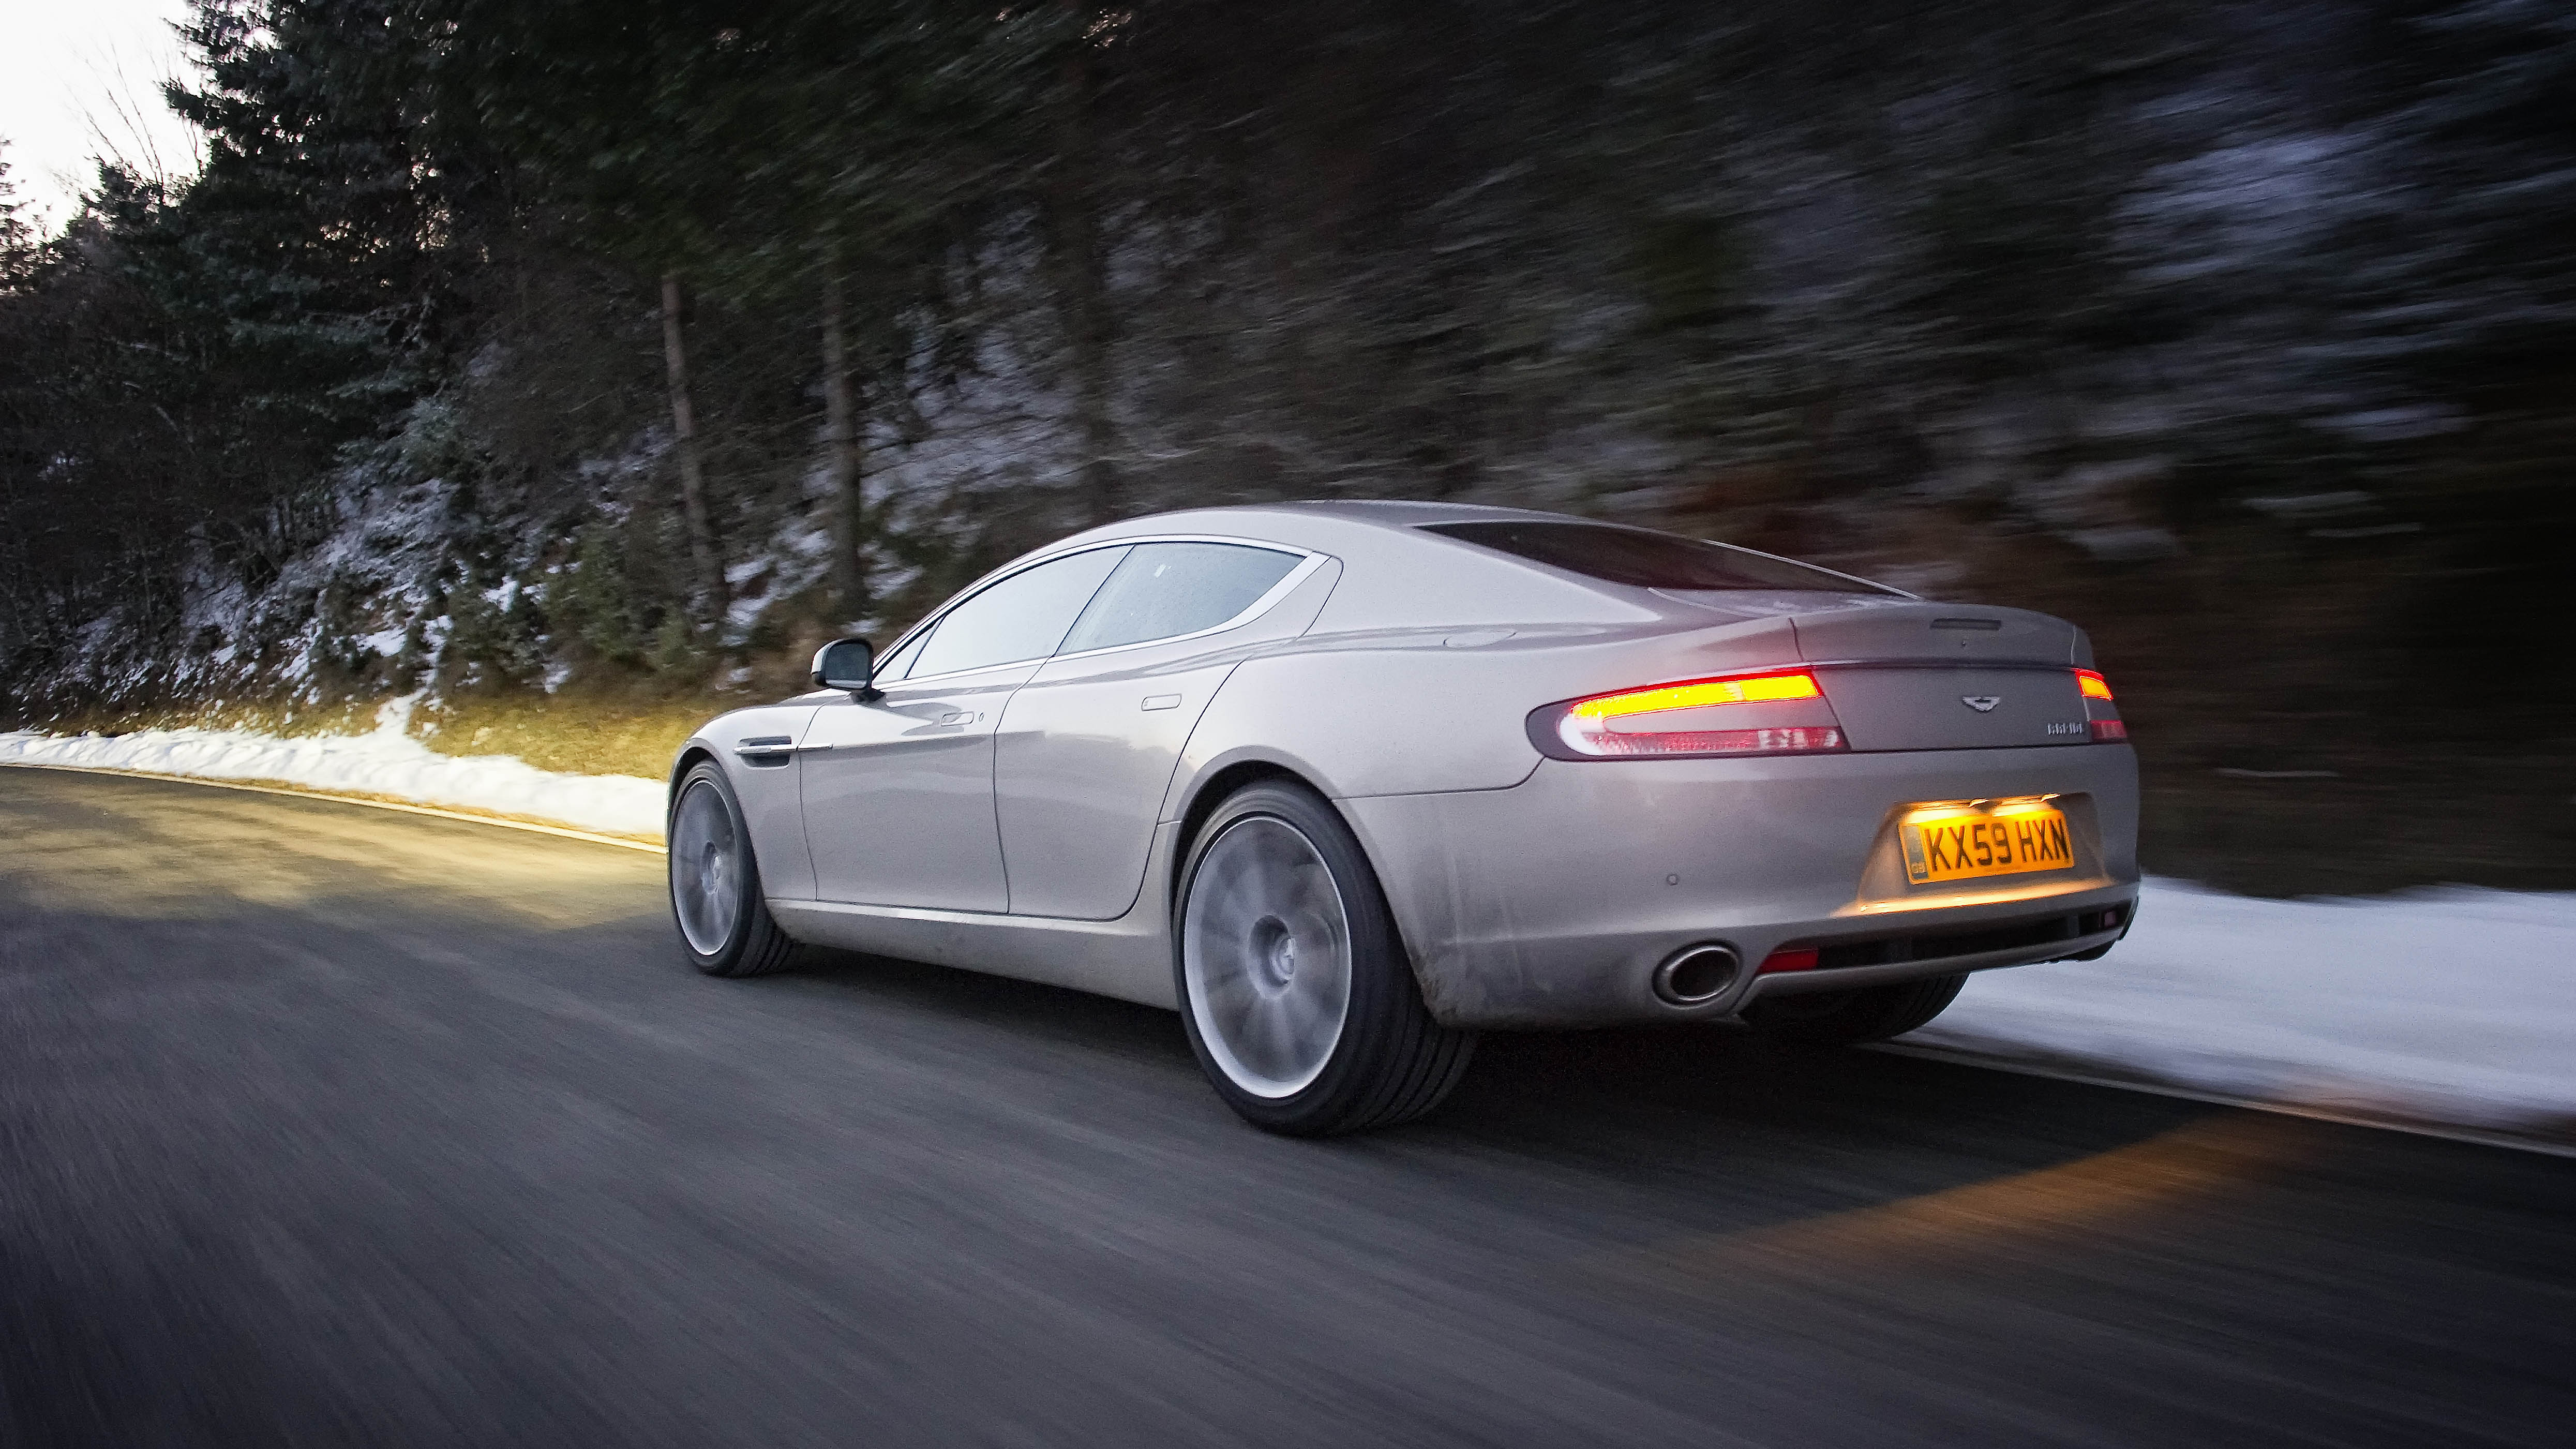 From the archives: a 2010 road trip in Aston Martin's new Rapide | Top Gear